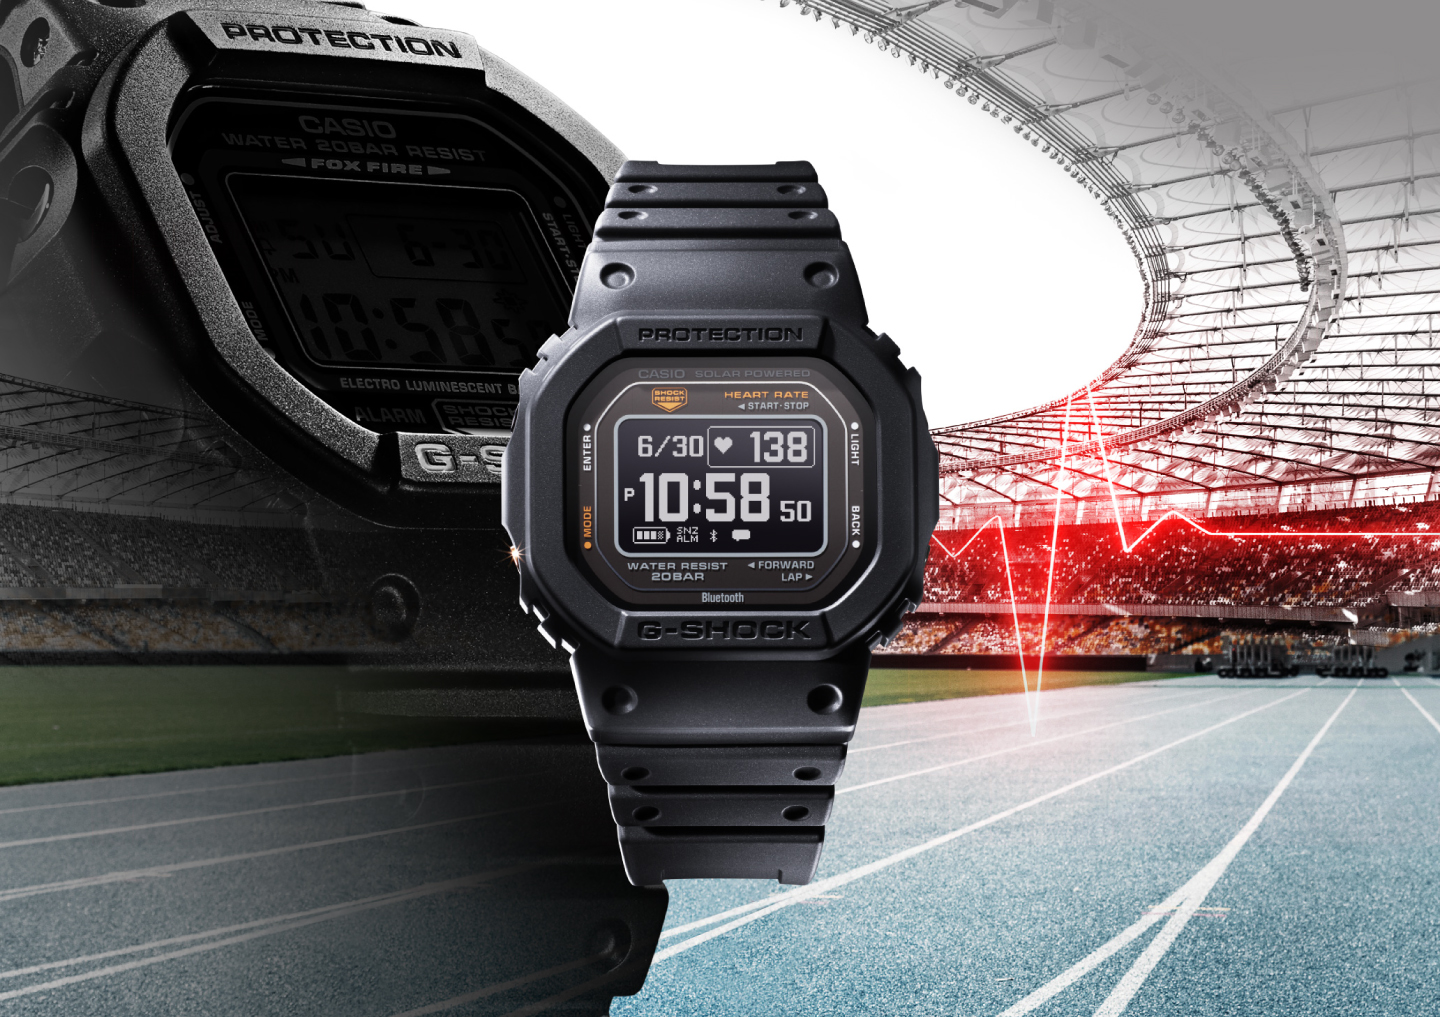 AT&S and Casio make durable G-SHOCK watch smart